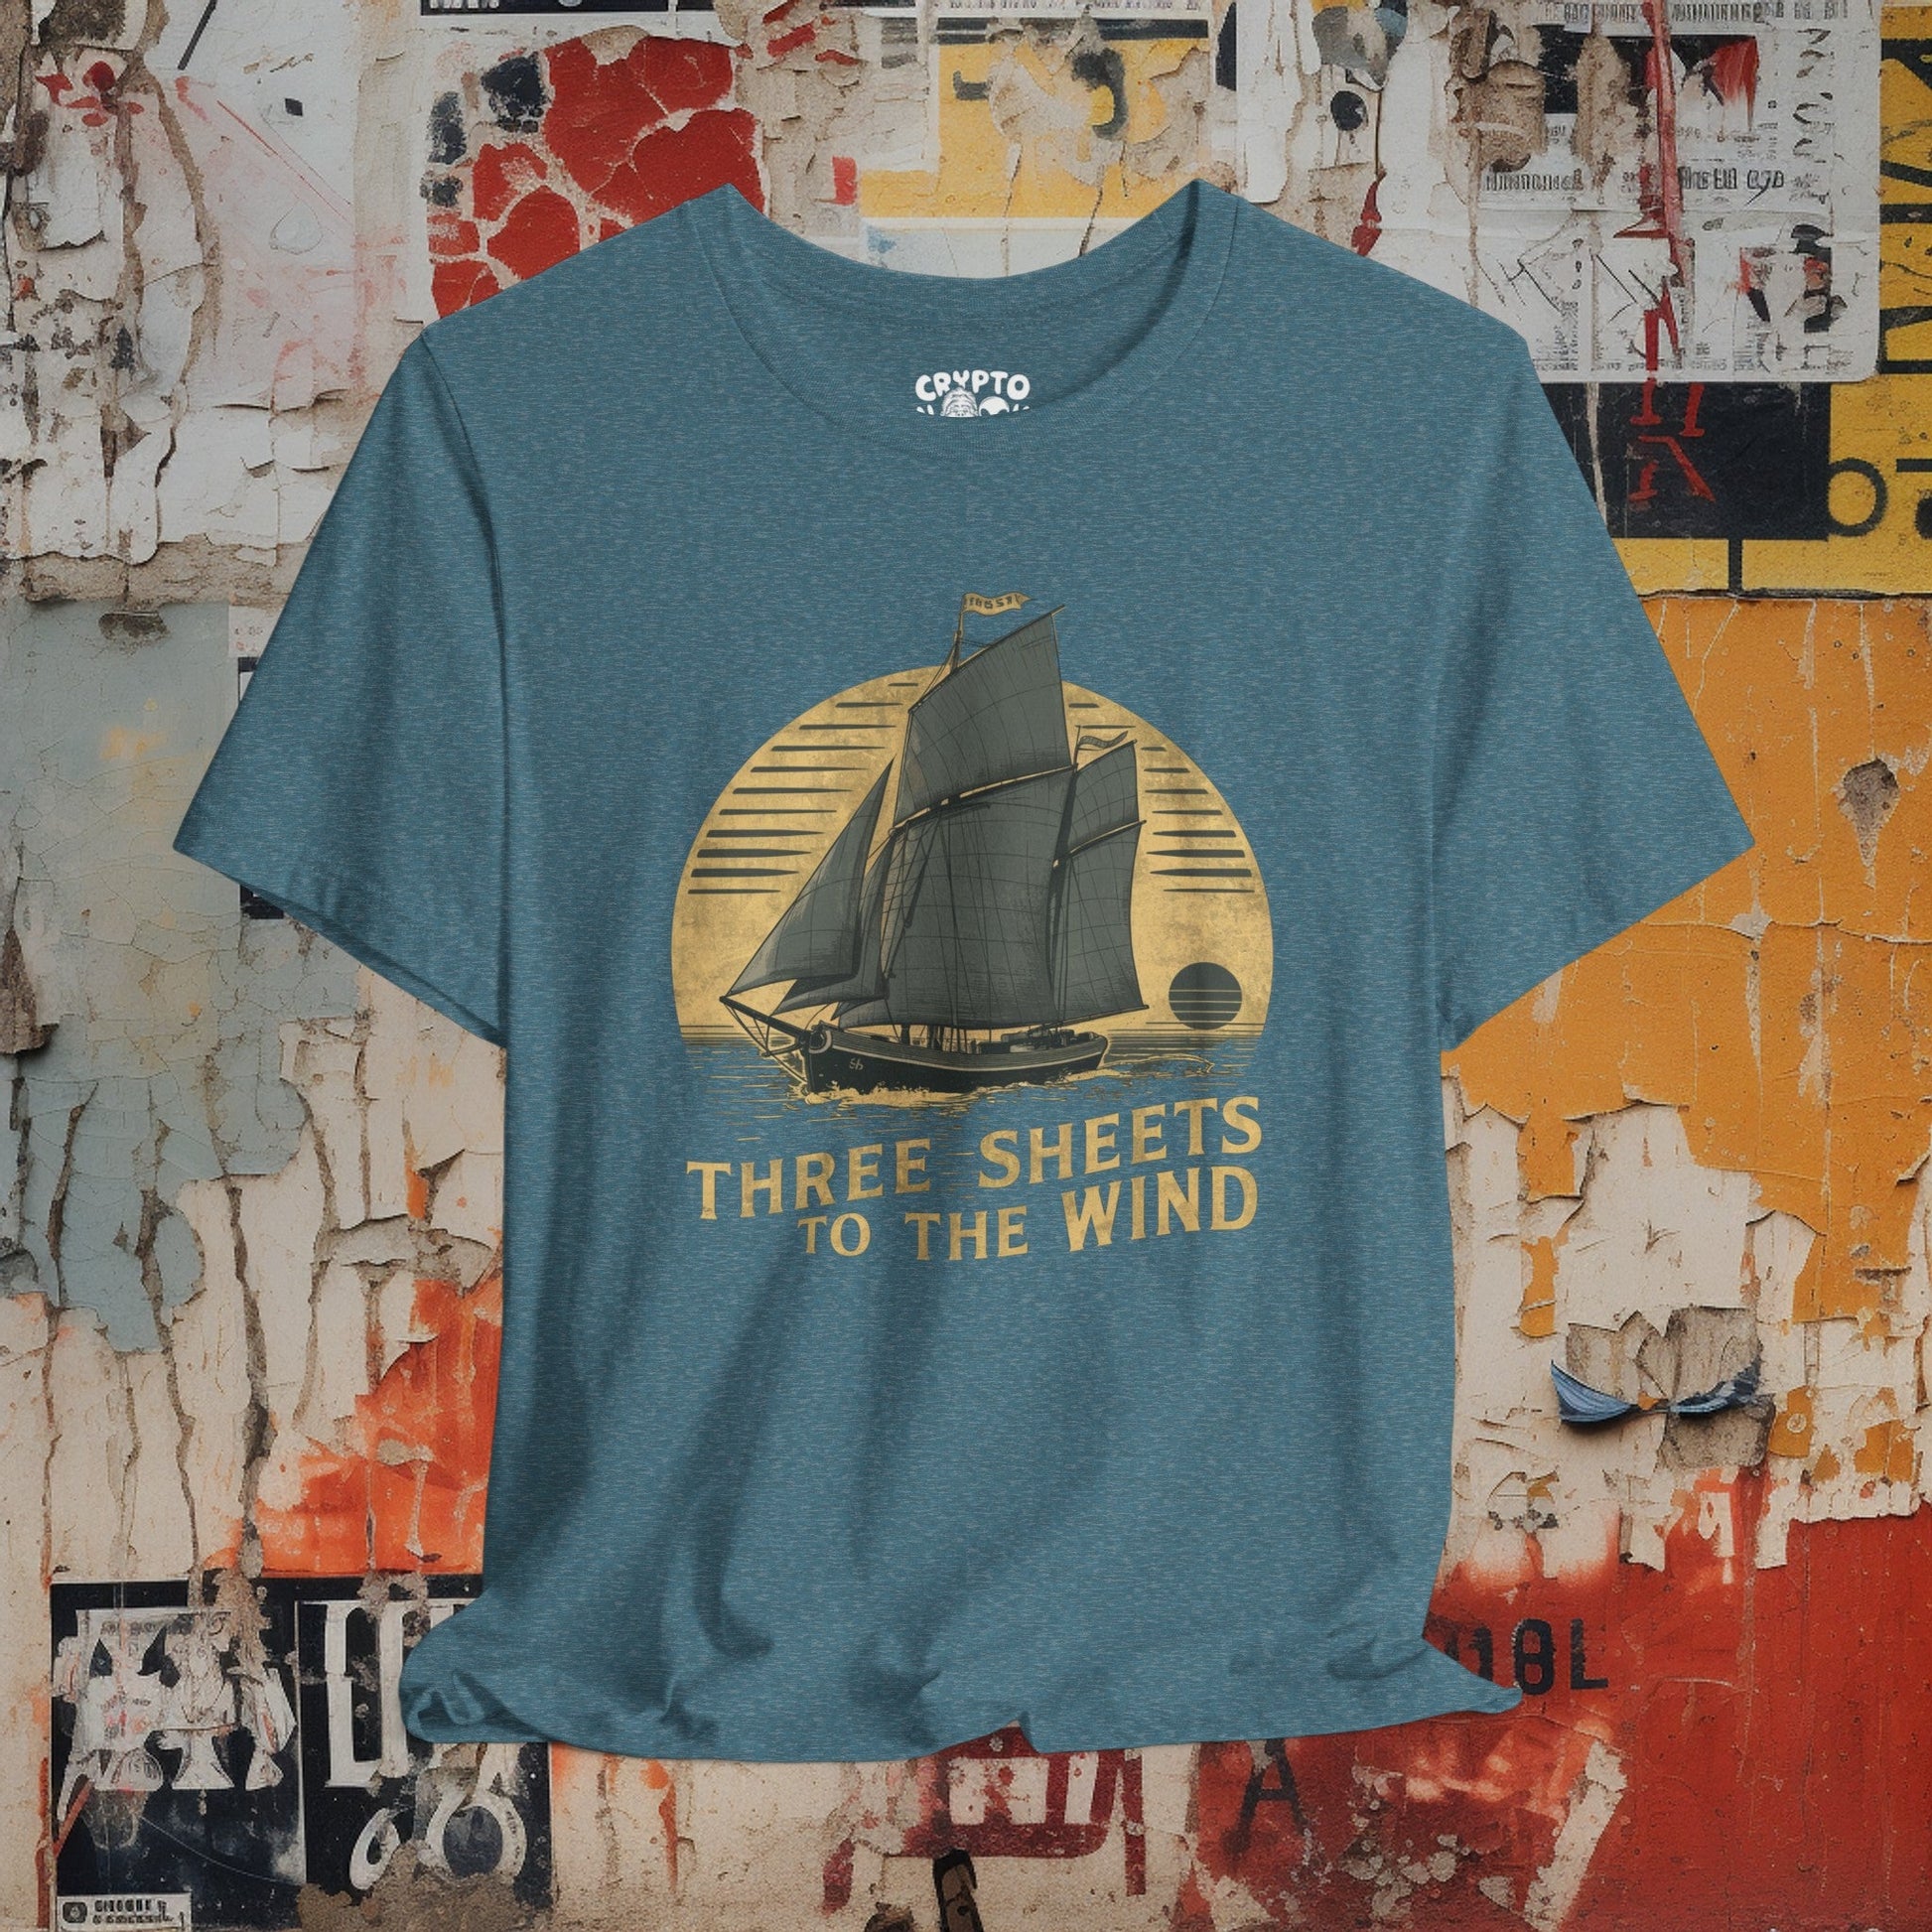 T-Shirt - Three Sheets to the Wind Funny Sailing Shirt | Bella + Canvas Unisex T-shirt from Crypto Zoo Tees